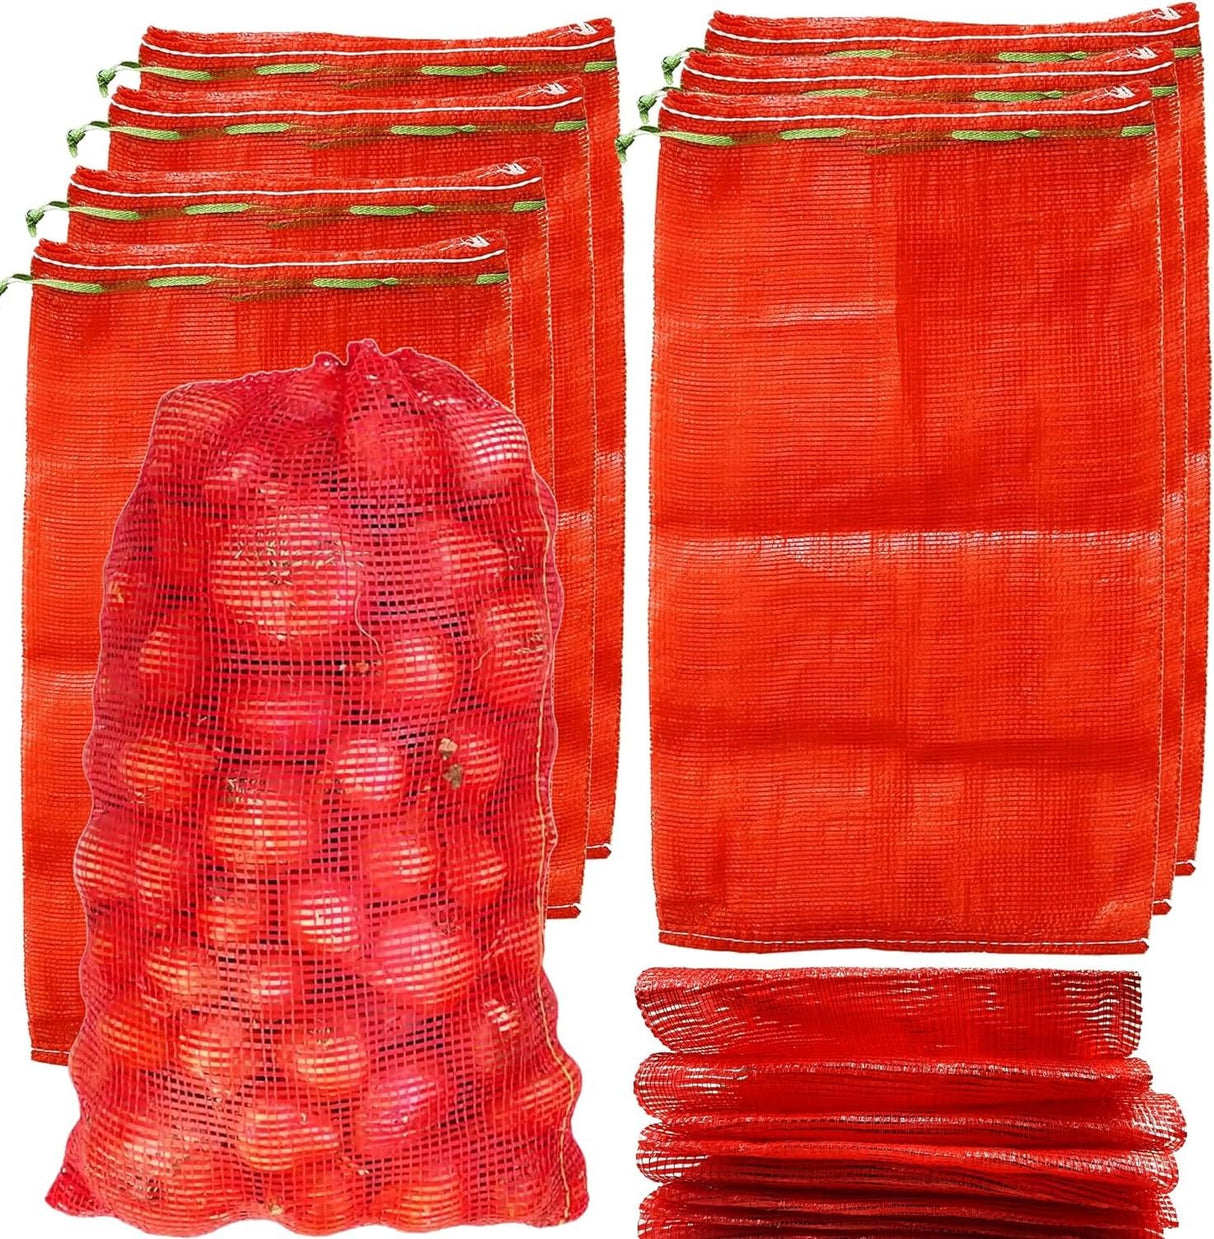 SINGHAL Leno Mesh Storage Produce Bags Reusable for Vegetable Storage Bags Onion Storage Washable Net Bags (22x32 Inch - Raani, 50)